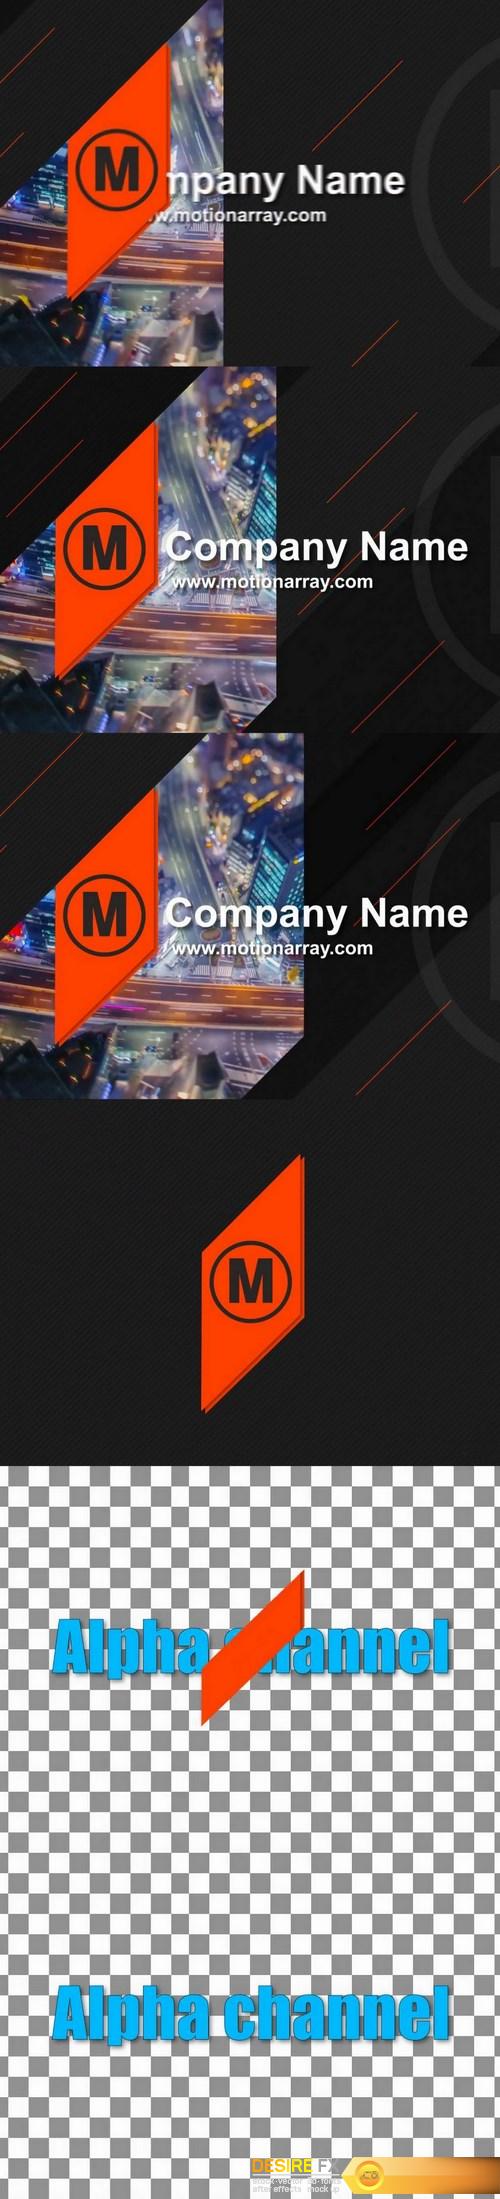 Motion Array – Company Name Project 34969